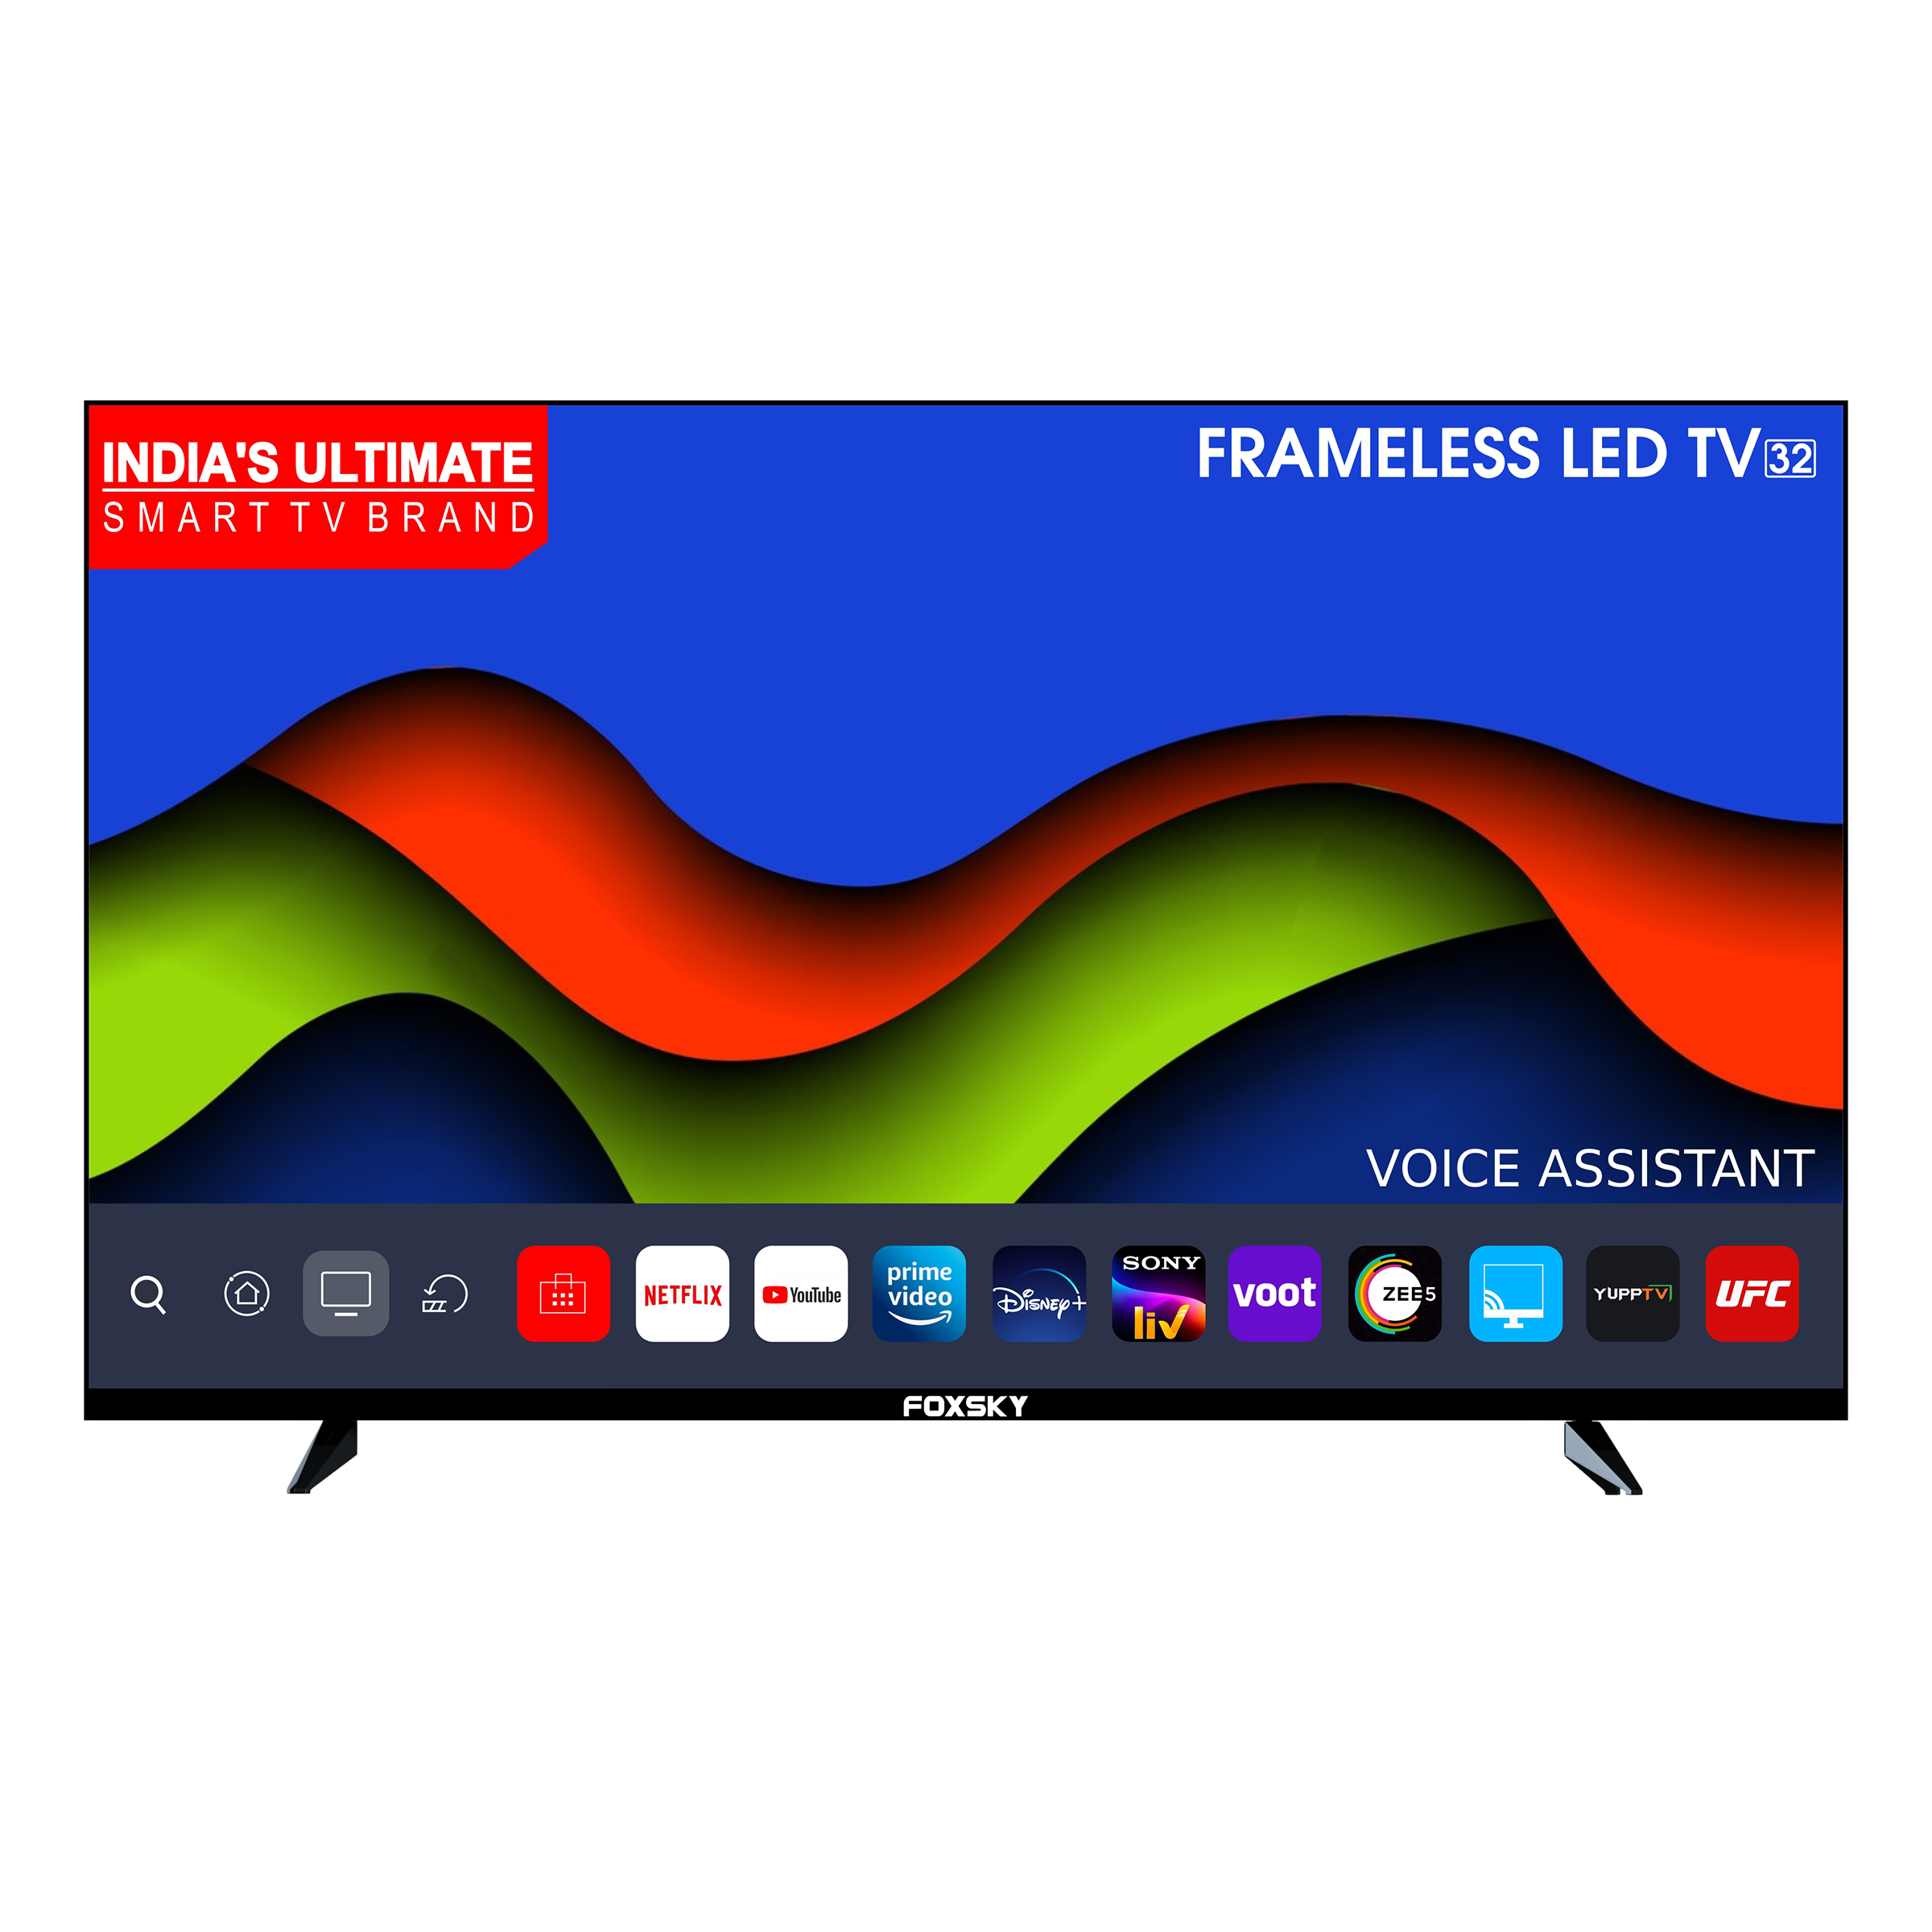 Foxsky 80cm (32 Inches) Full HD LED Android Smart TV (A+ Grade Panel, 32FS-VS, Black)_1